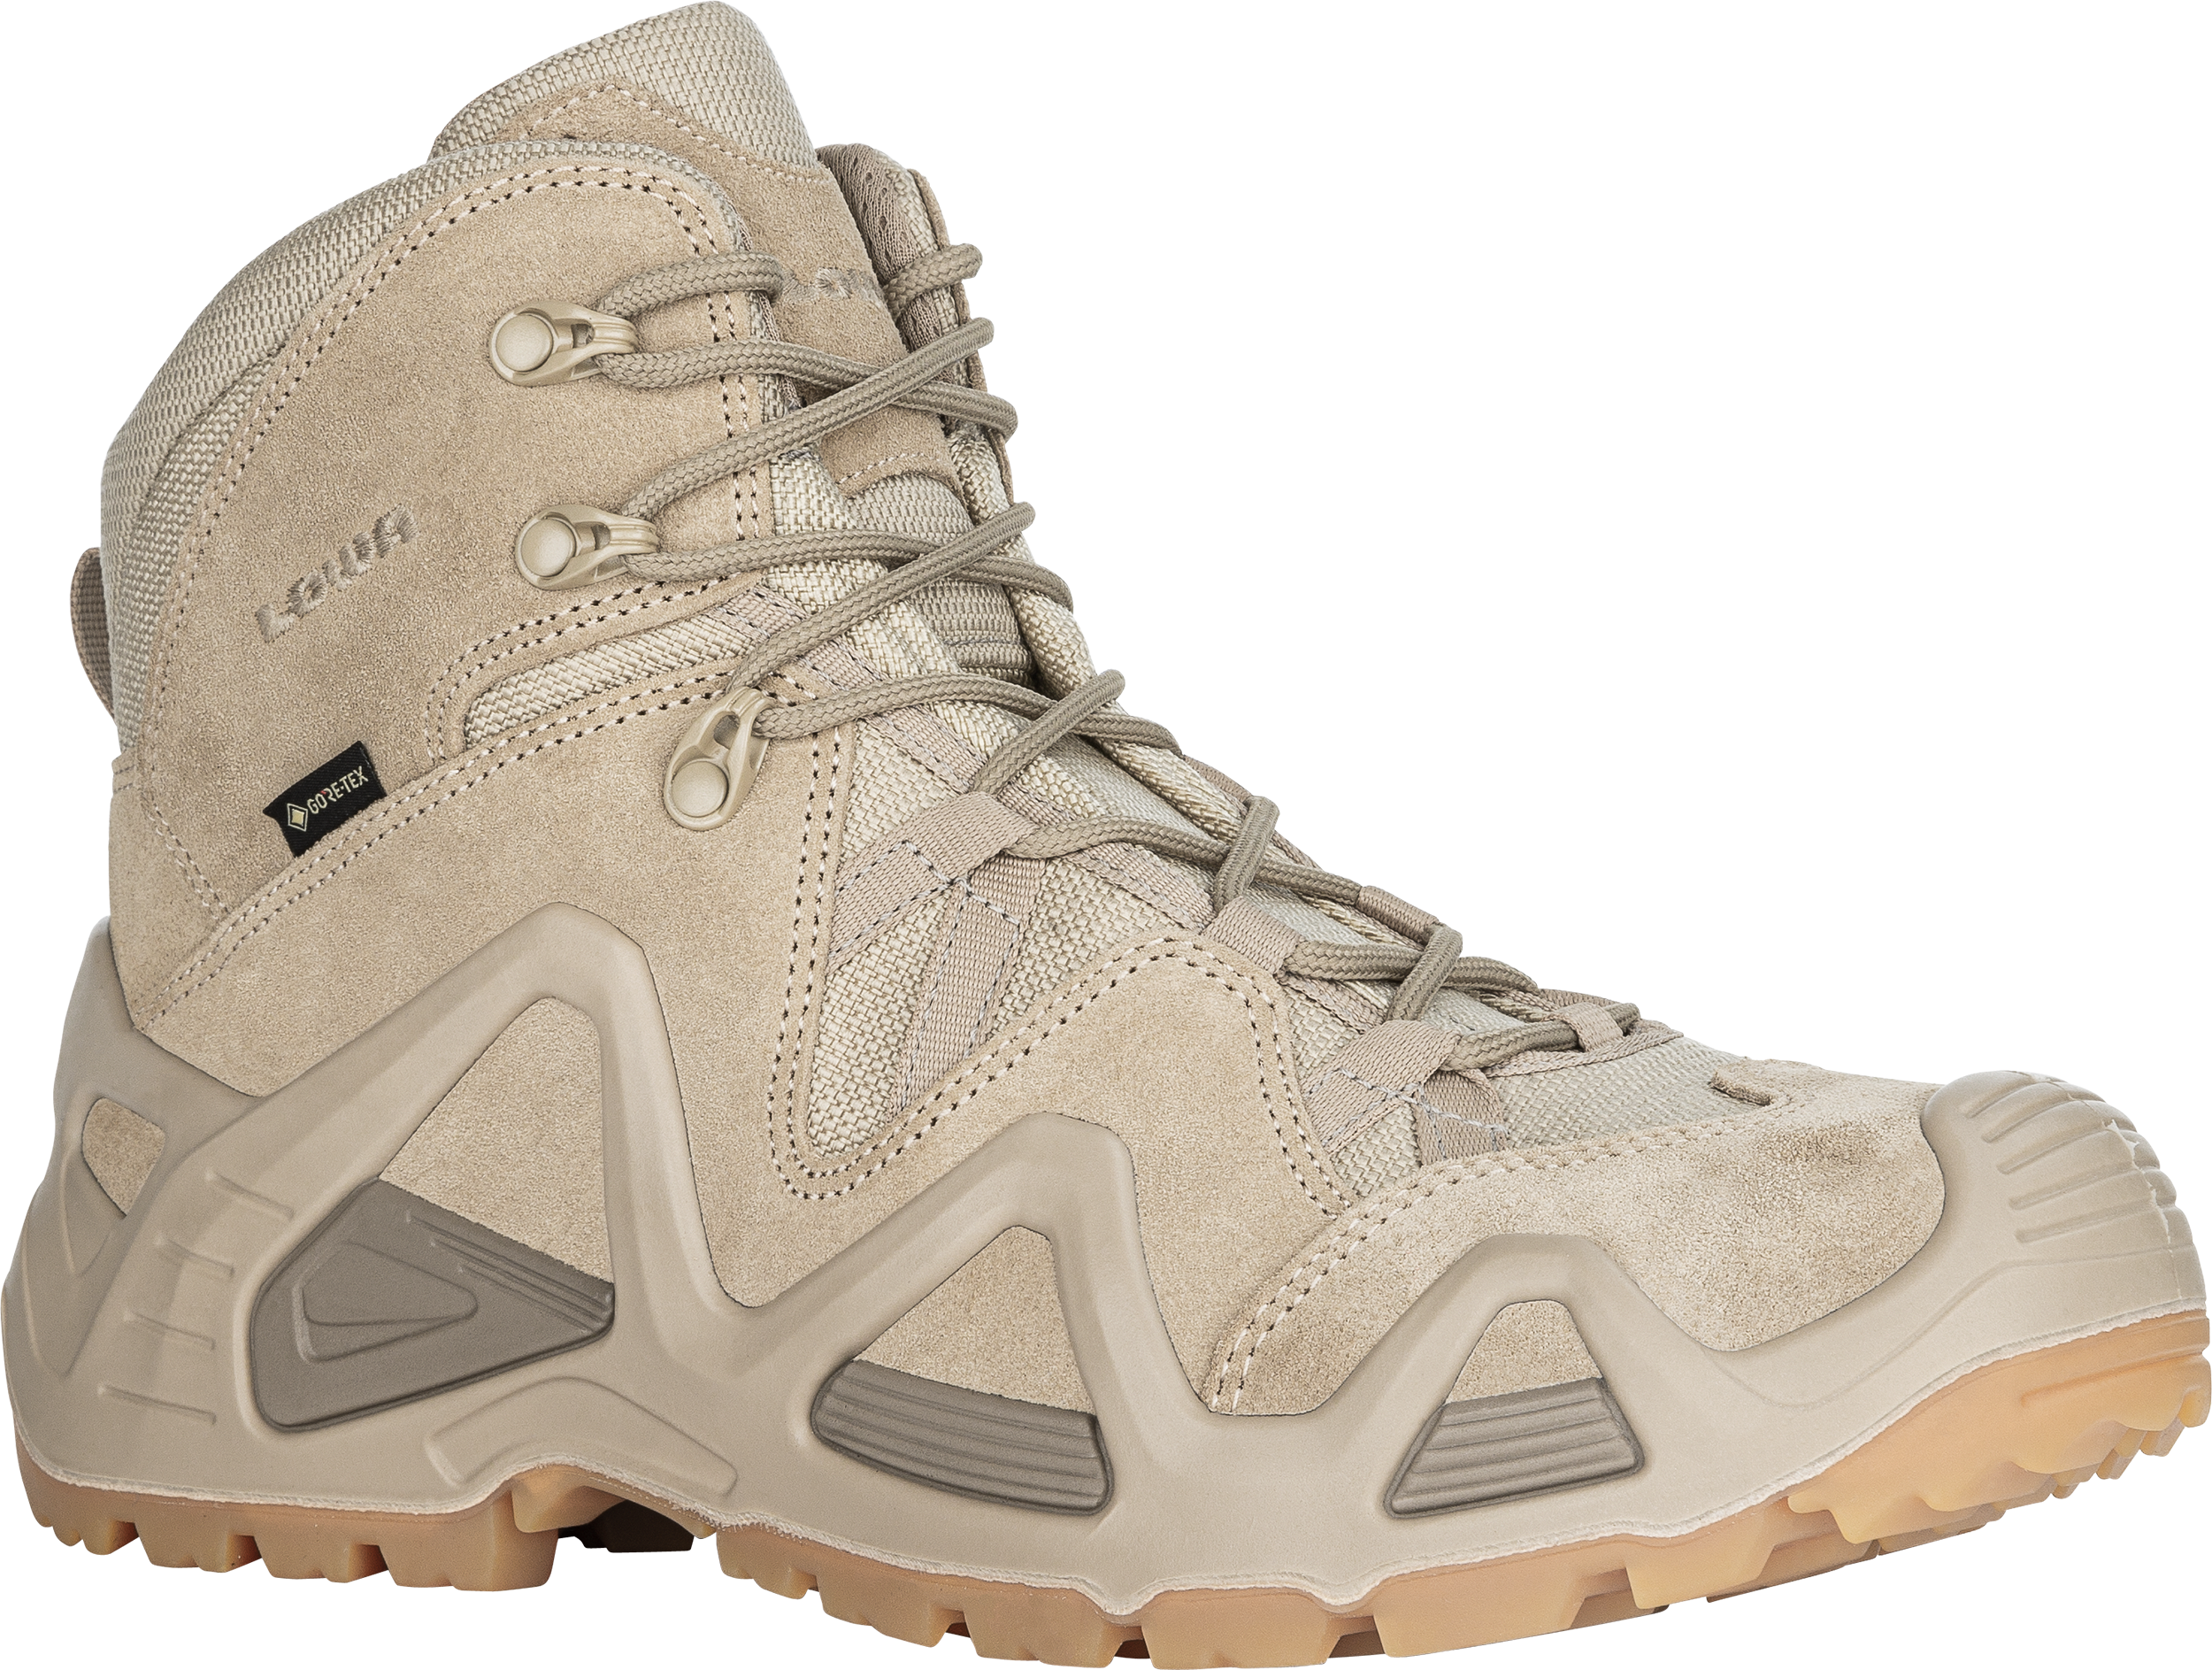 ZEPHYR GTX MID TF: TASK FORCE: CLOSE-QUARTERS COMBAT Chaussures Hommes | LOWA BE